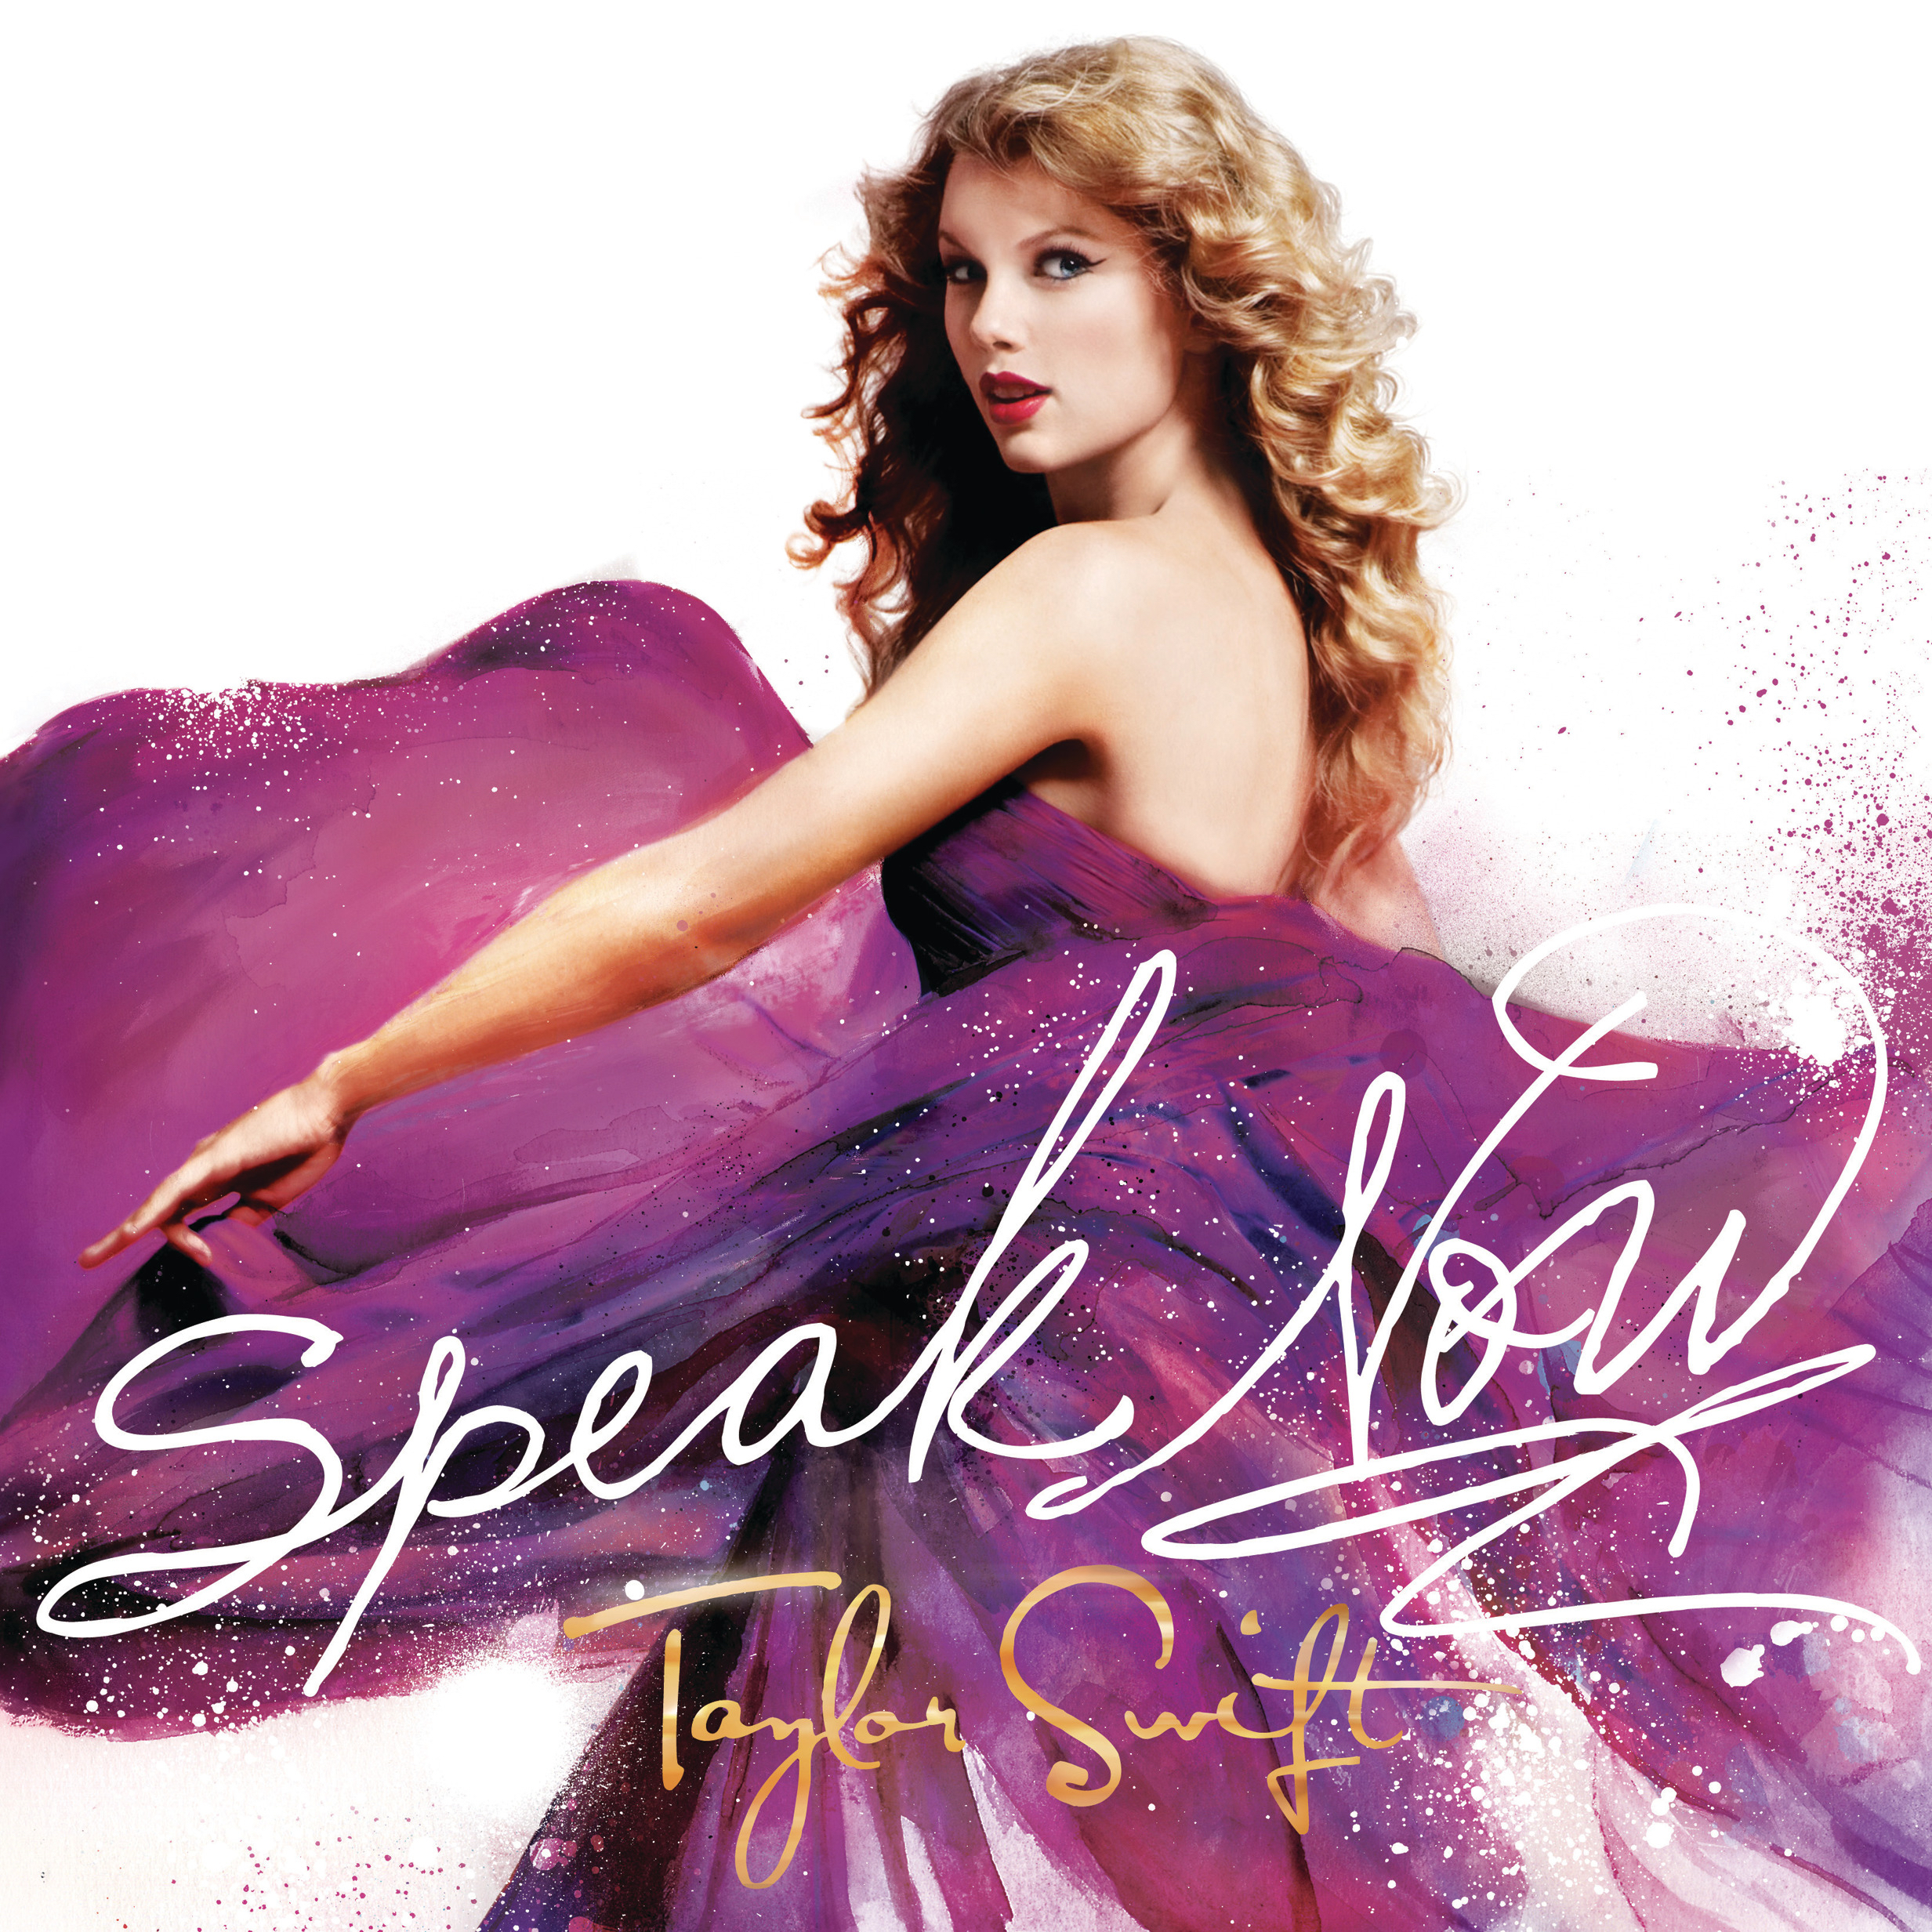 enchanted taylor swift album cover